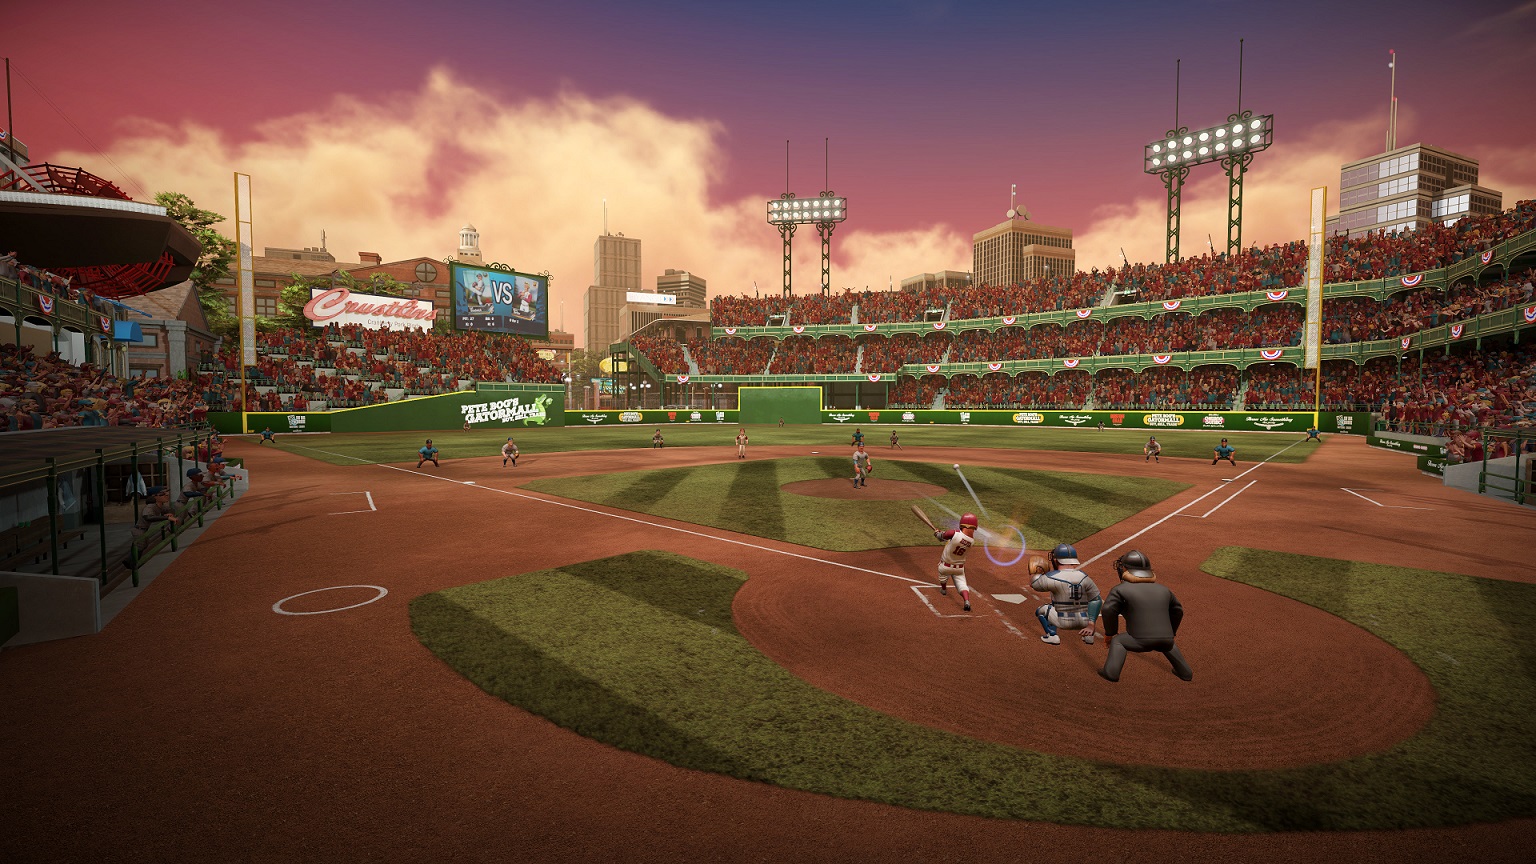 Super Mega Baseball 4 Review: Gameplay Videos, Features, Modes and